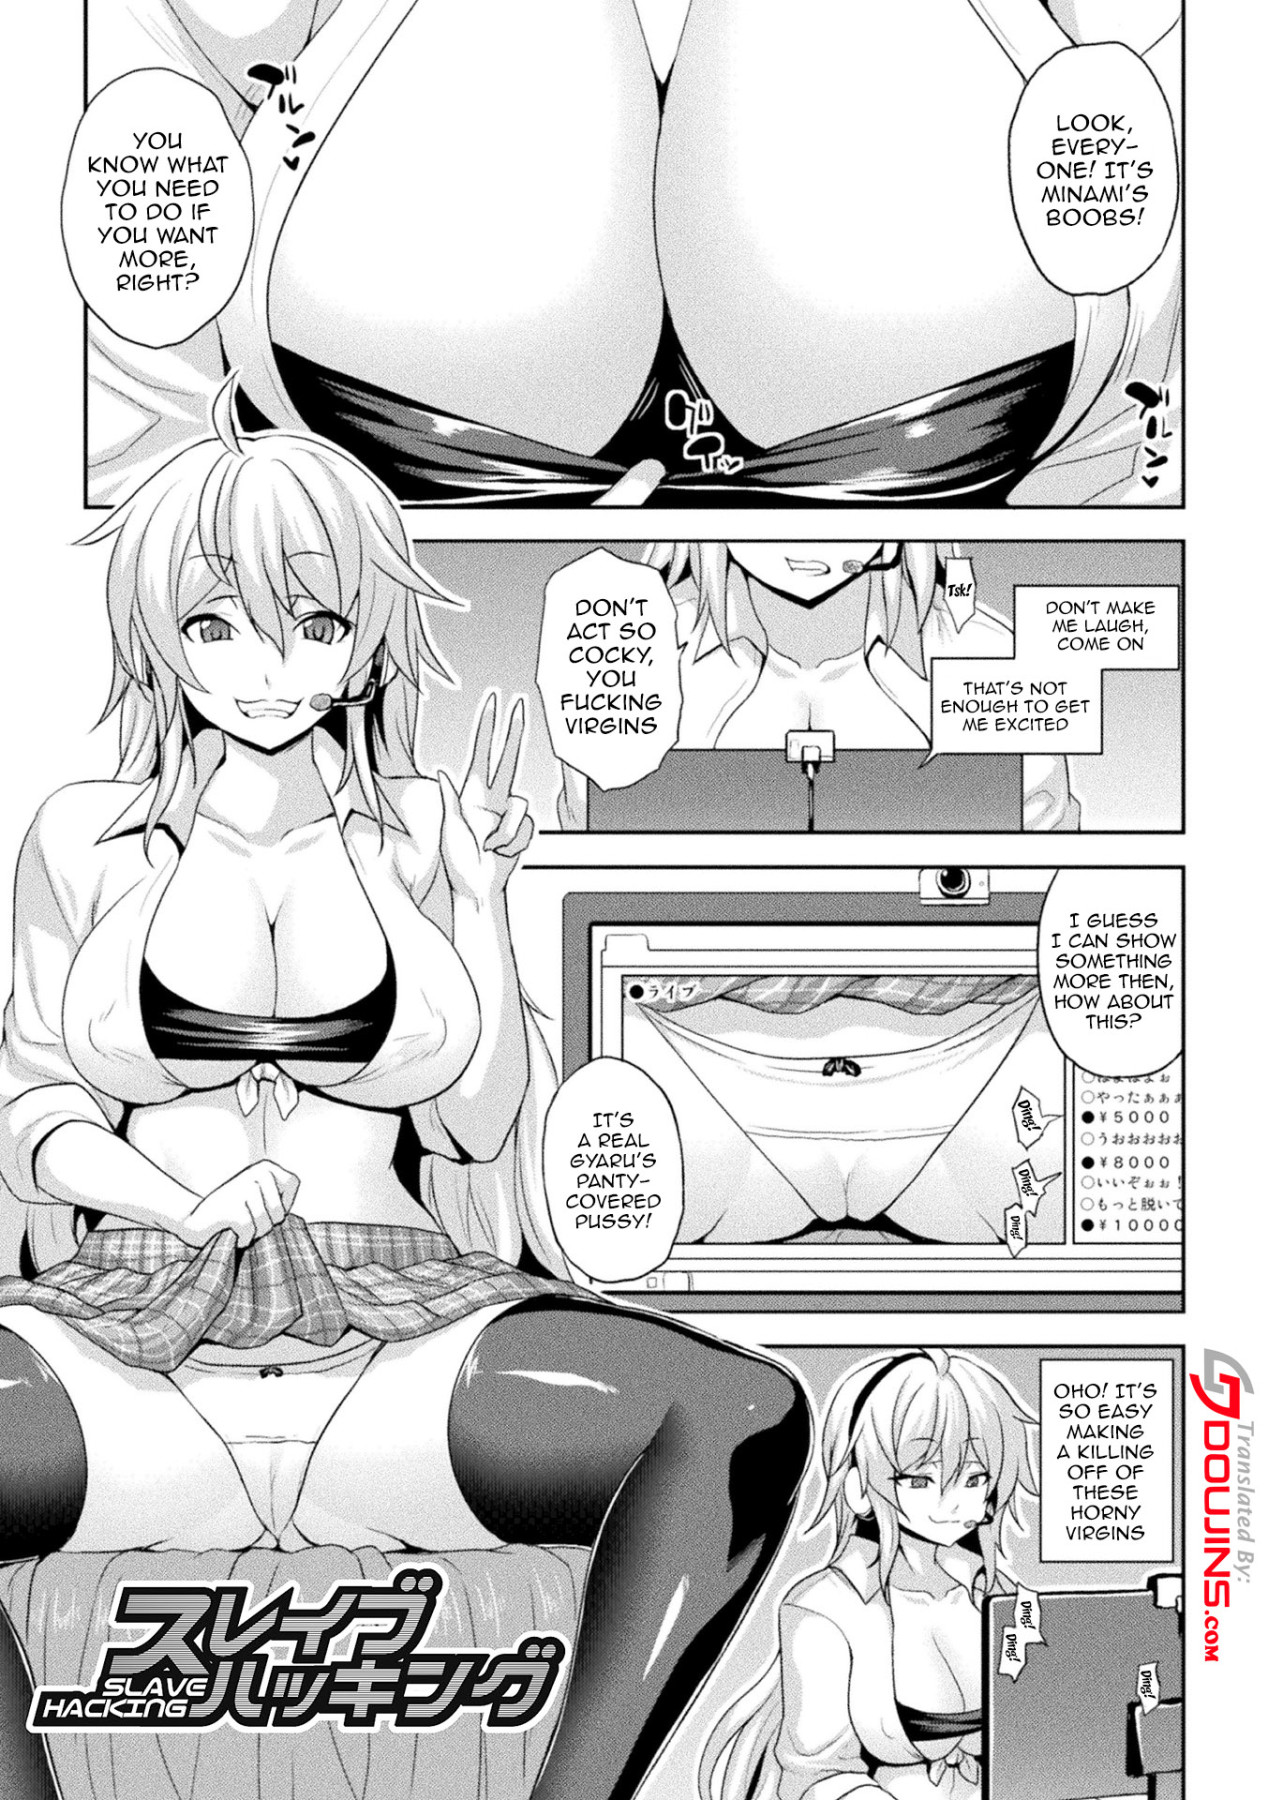 Hentai Manga Comic-The Woman Who's Fallen Into Being a Slut In Defeat-Chapter 7-1